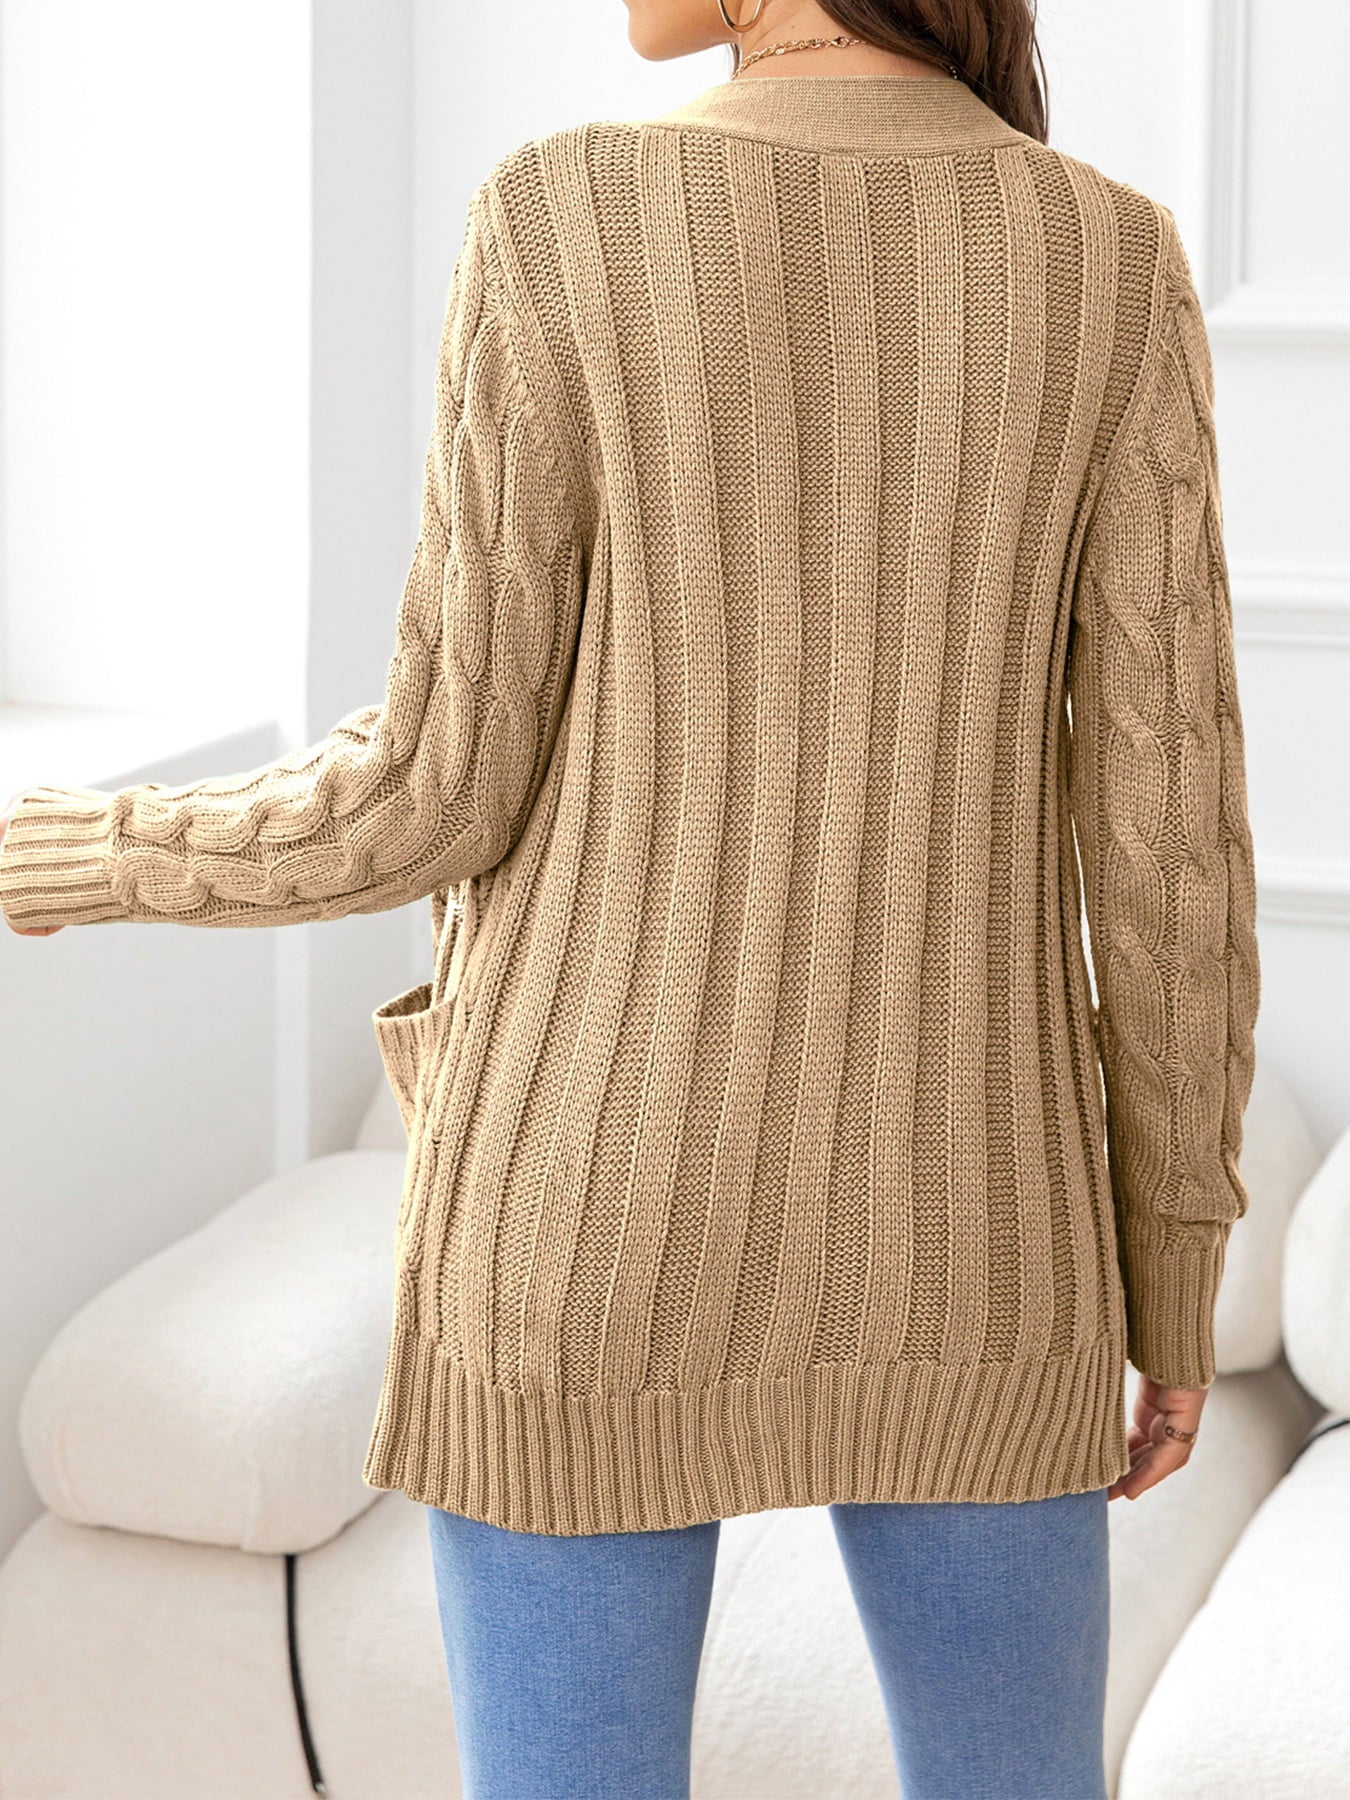 Button Down Cable-Knit Cardigan - Women’s Clothing & Accessories - Shirts & Tops - 27 - 2024